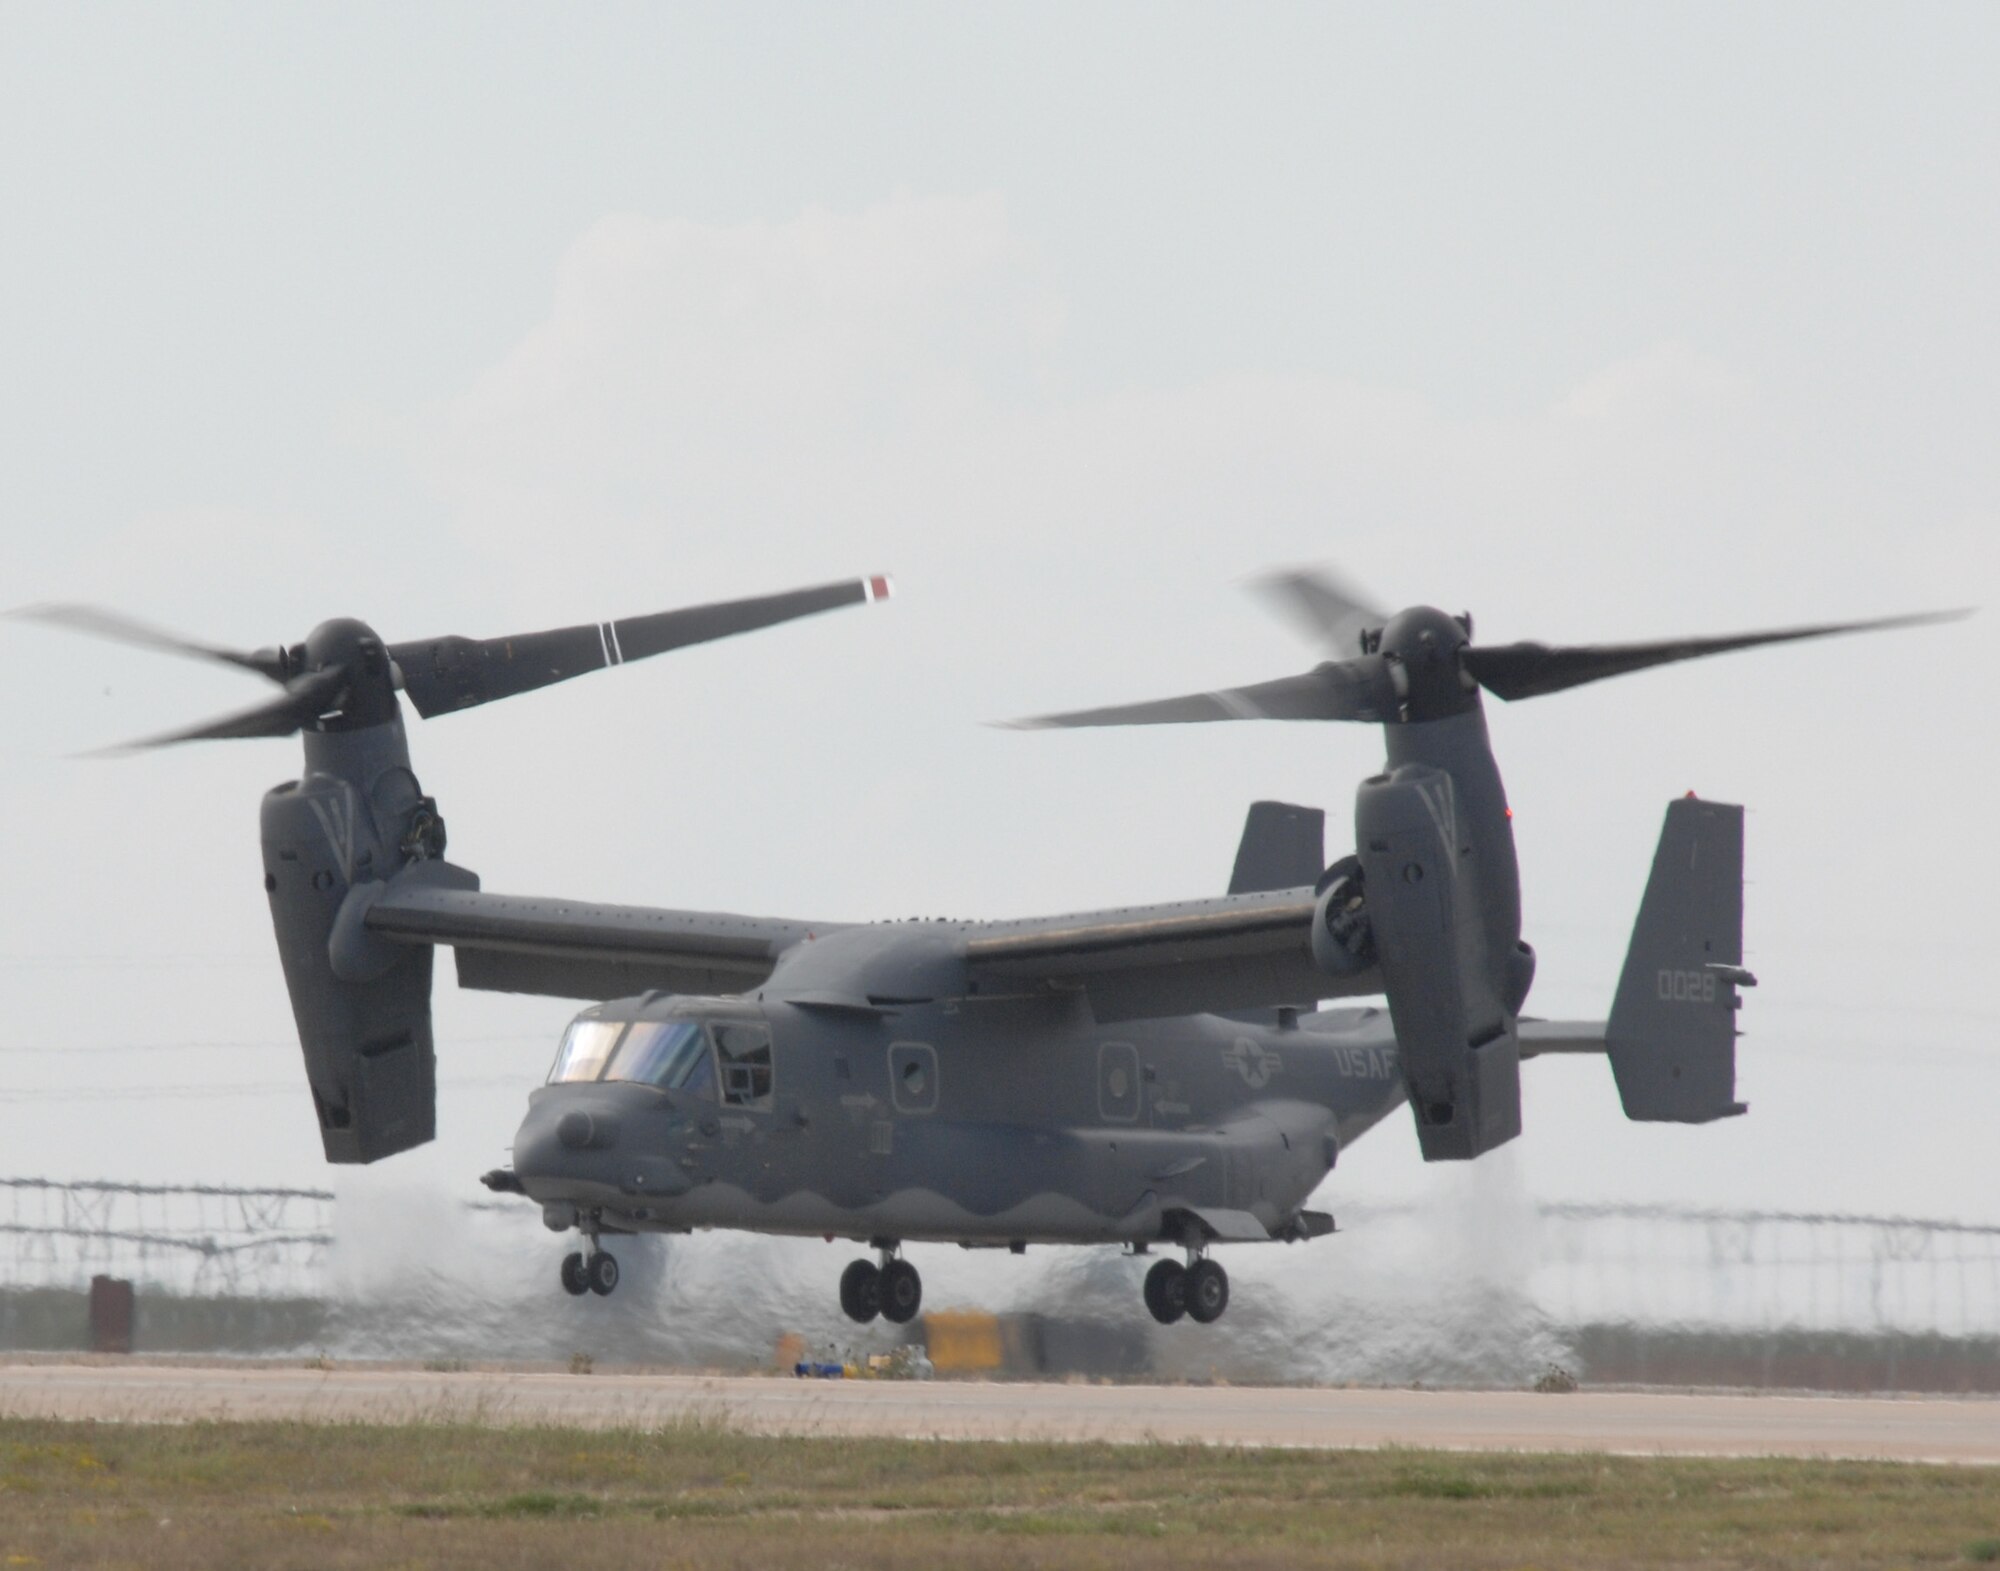 CANNON AIR FORCE BASE, N.M. -- A CV-22 Osprey takes off from Cannon Air Force Base September 29. Air Force Special Operations Command assumed command of Cannon in a change-of-command ceremony Oct. 1. (U.S. Air Force photo by Airman 1st Class Evelyn Chavez)